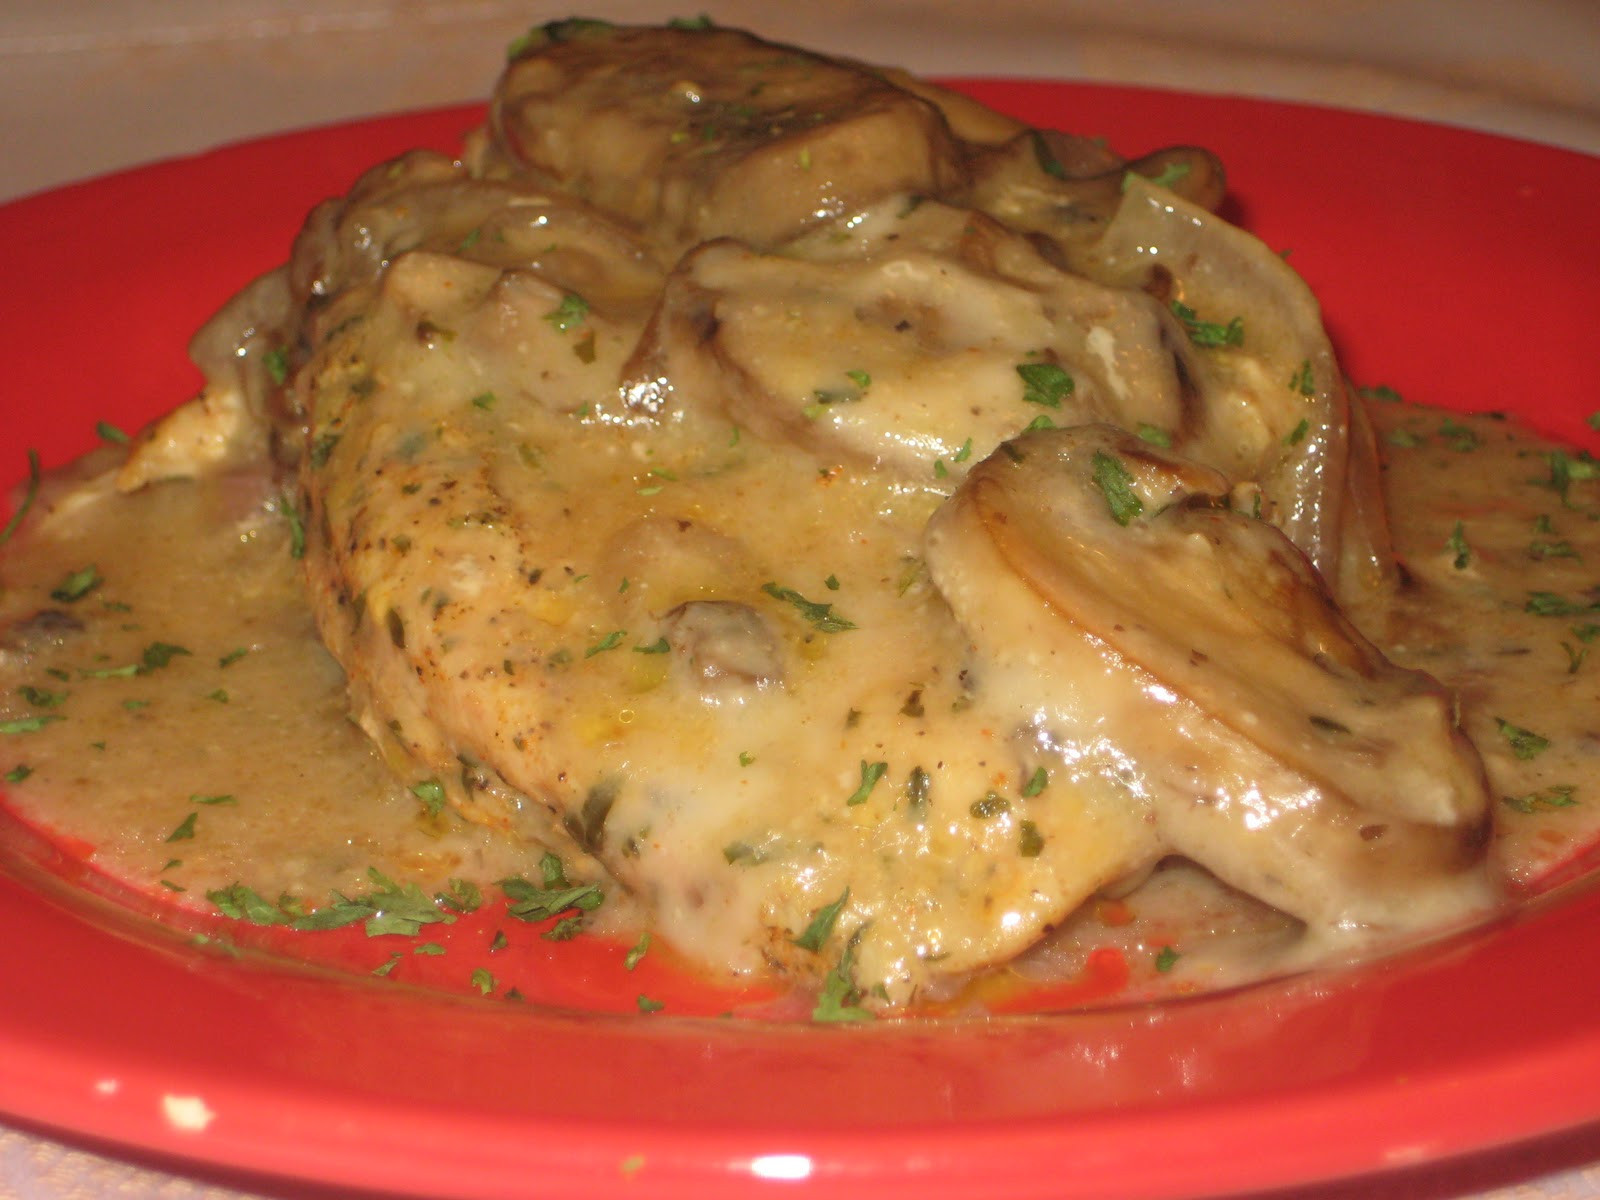 Smothered Chicken Recipe With Cream Of Mushroom Soup
 High on Shrooms Smothered Chicken